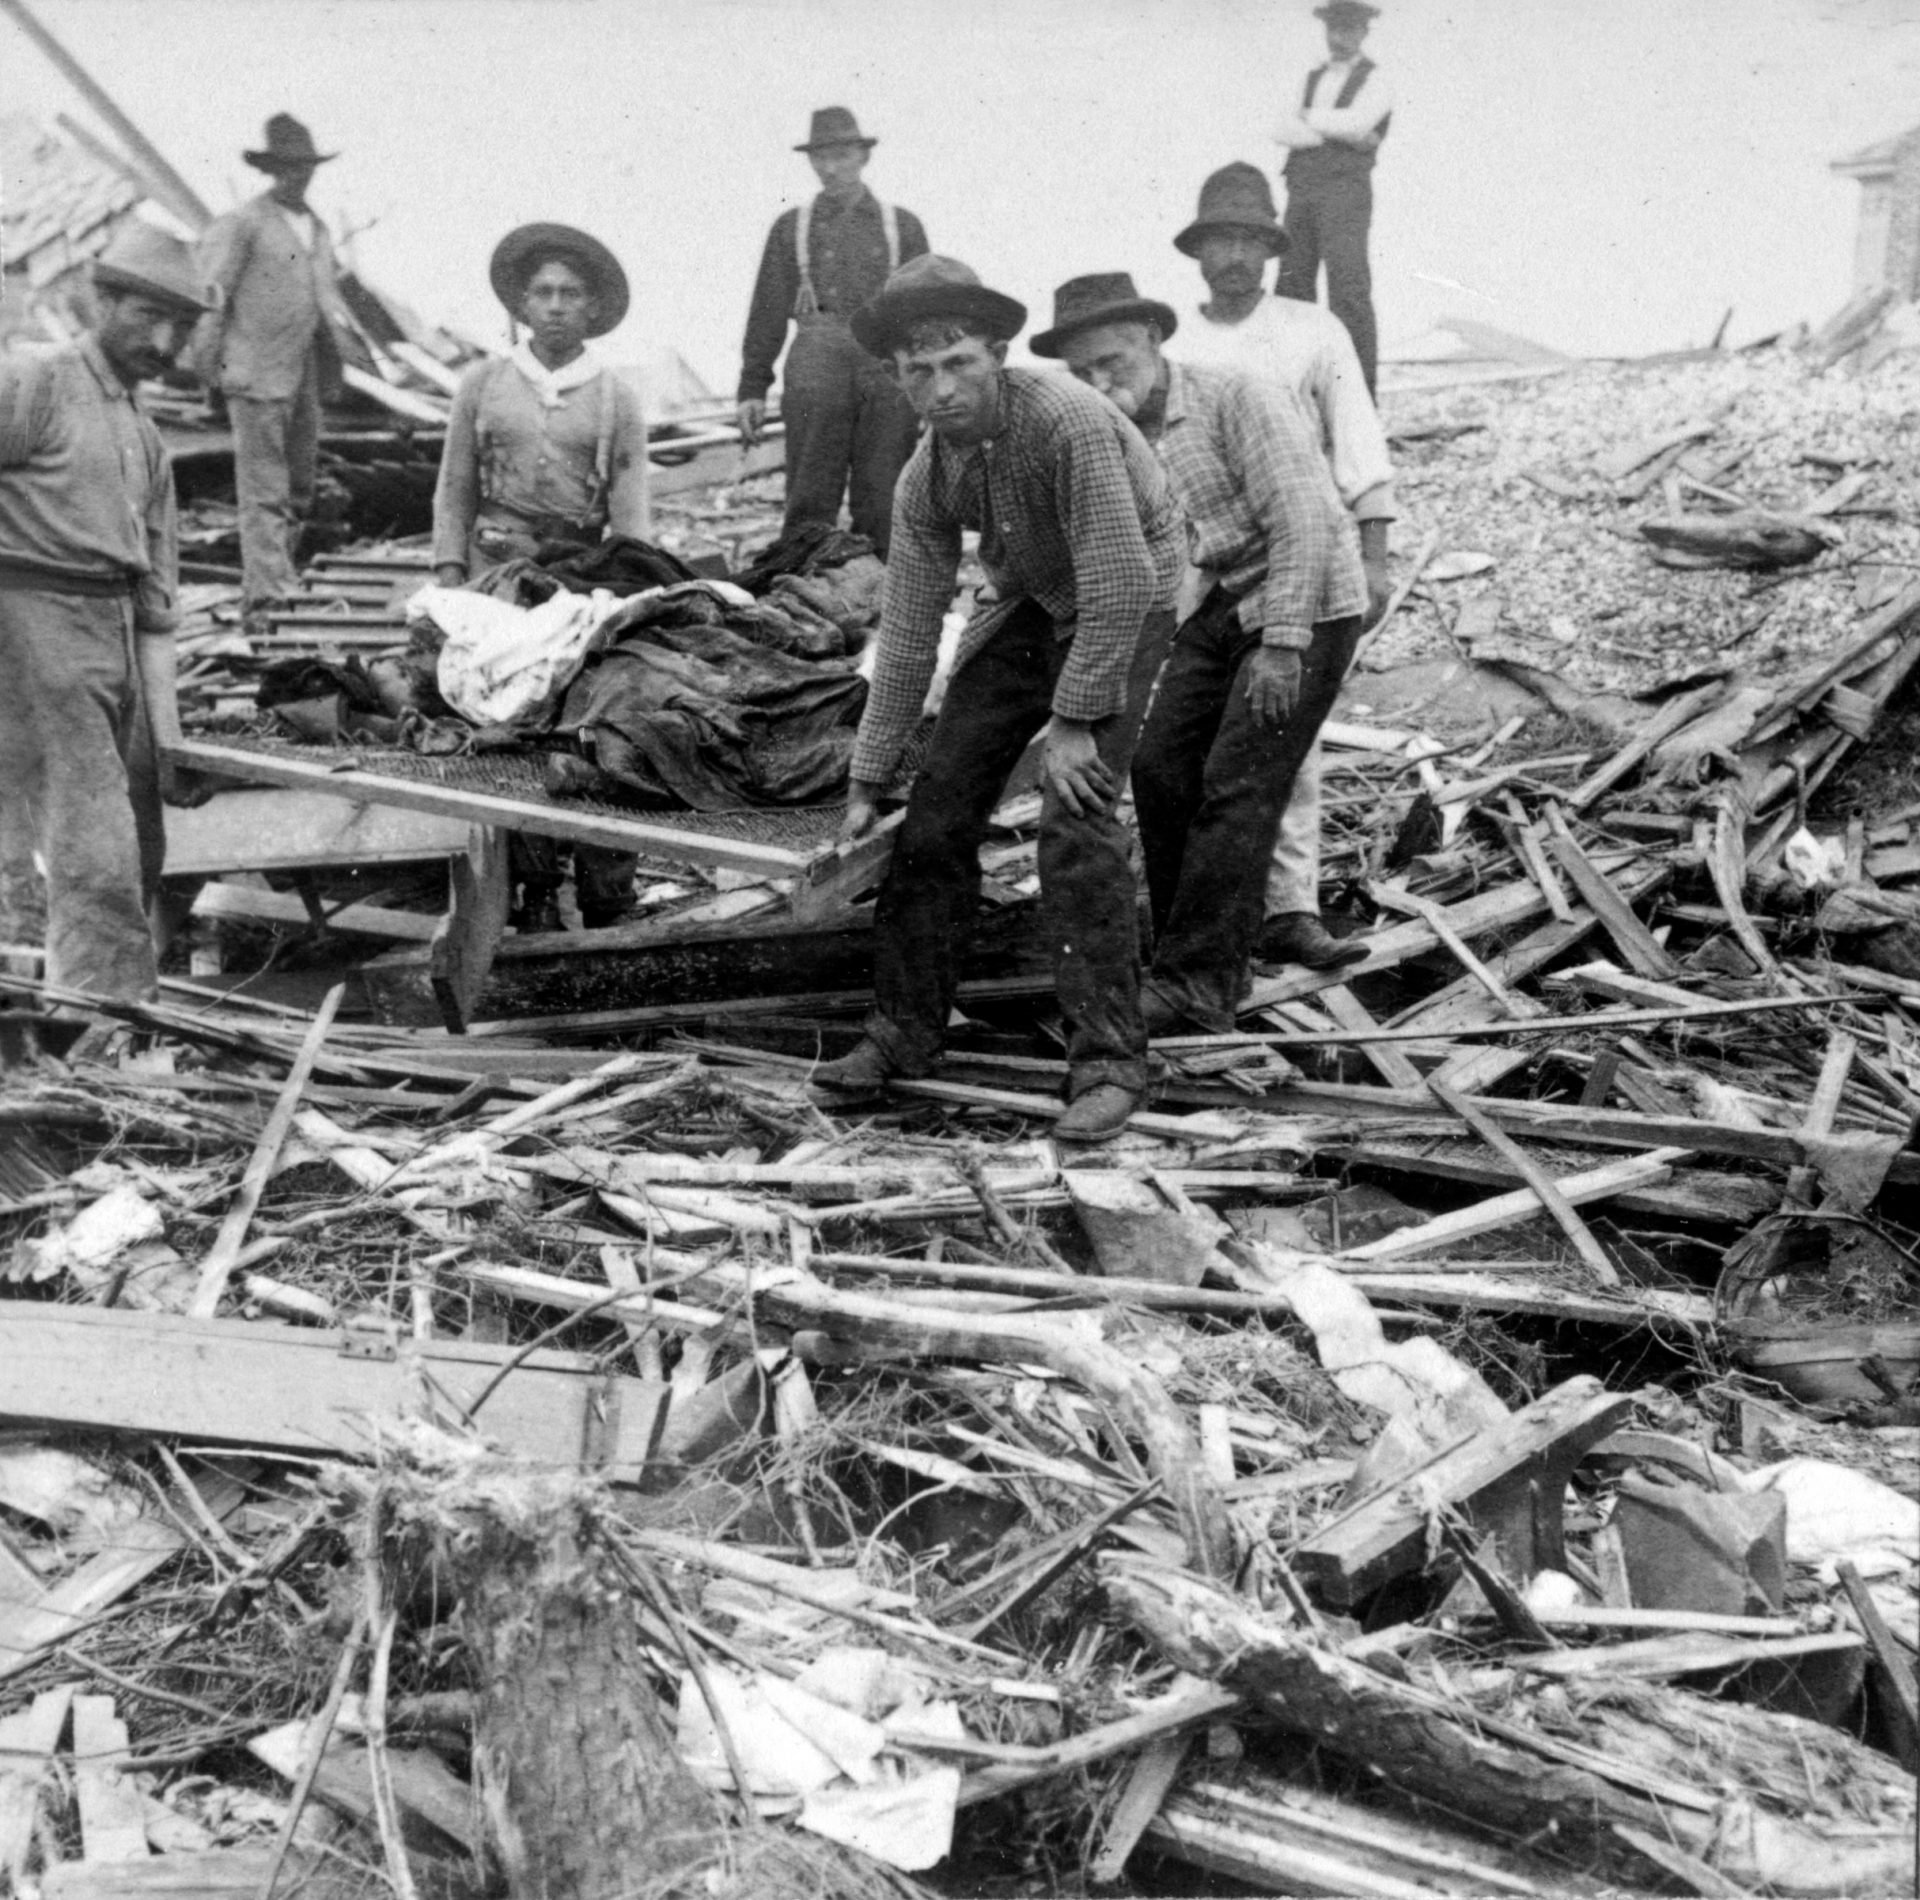 Men carrying bodies on a stretcher, surrounded by wreckage of the hurricane and flood, Galveston, Texas.